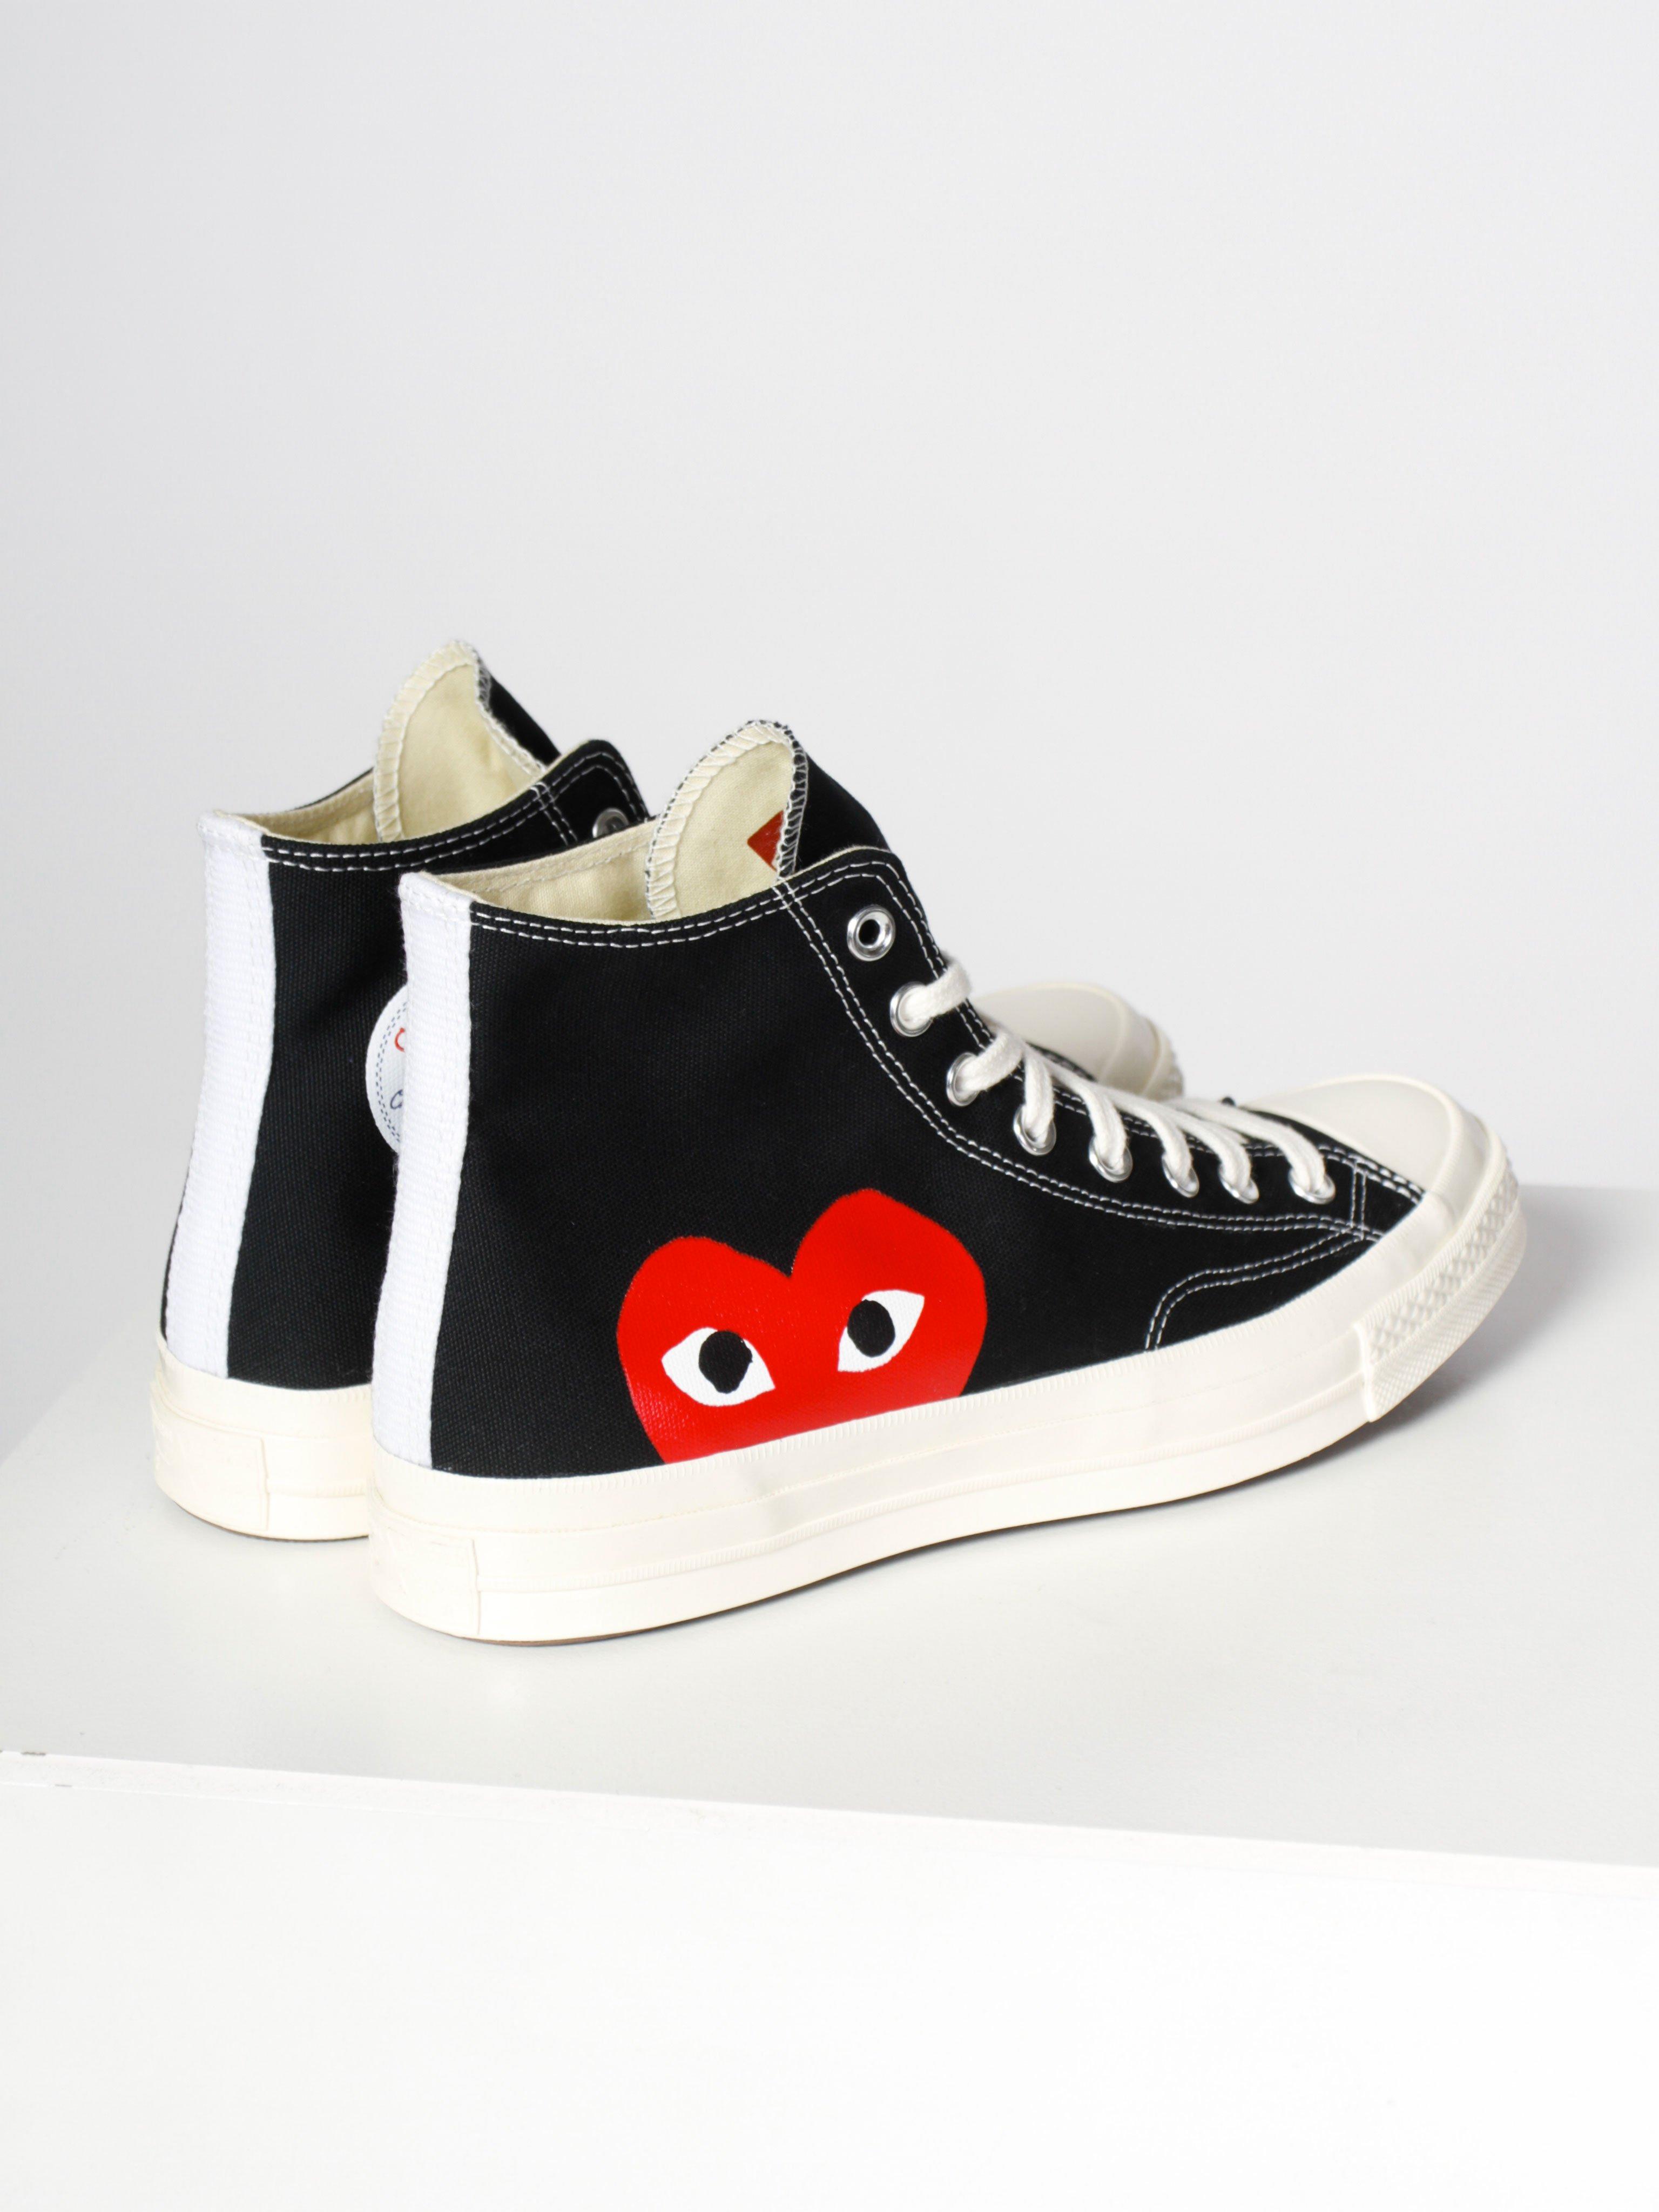 Converse With Red Heart Discount, 55% OFF | eaob.eu